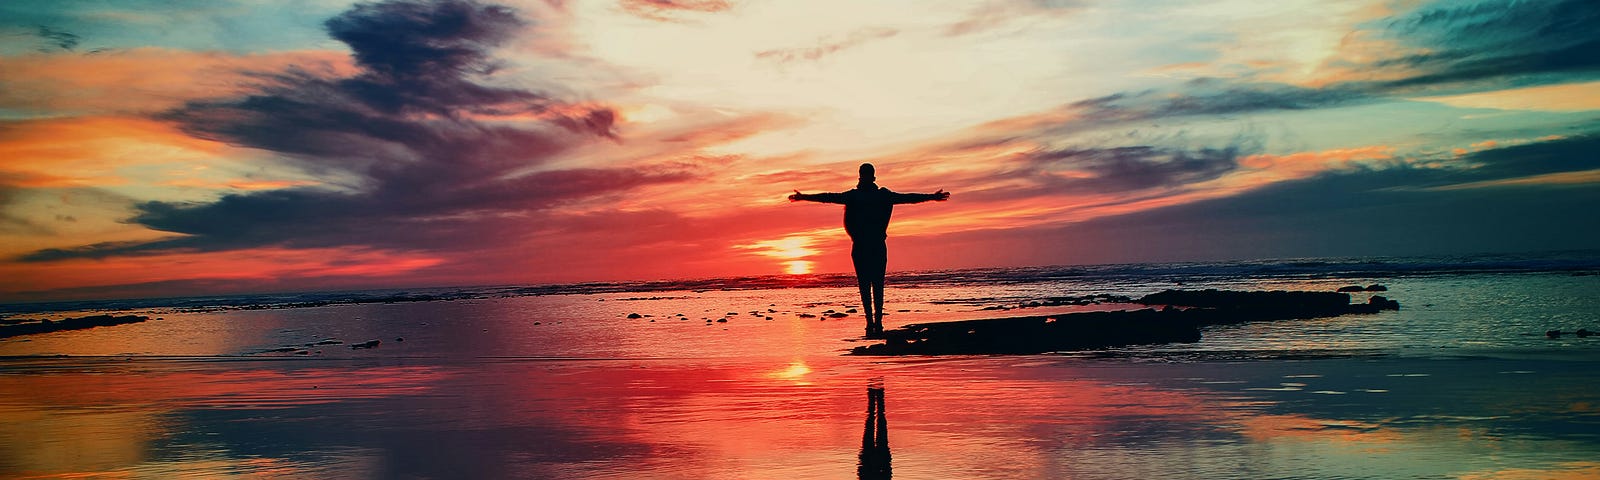 A figure standing in shallow water, surrounded by the beautiful colors of a sunset. How I presume it feels to look at a page without any red squiggles on it.